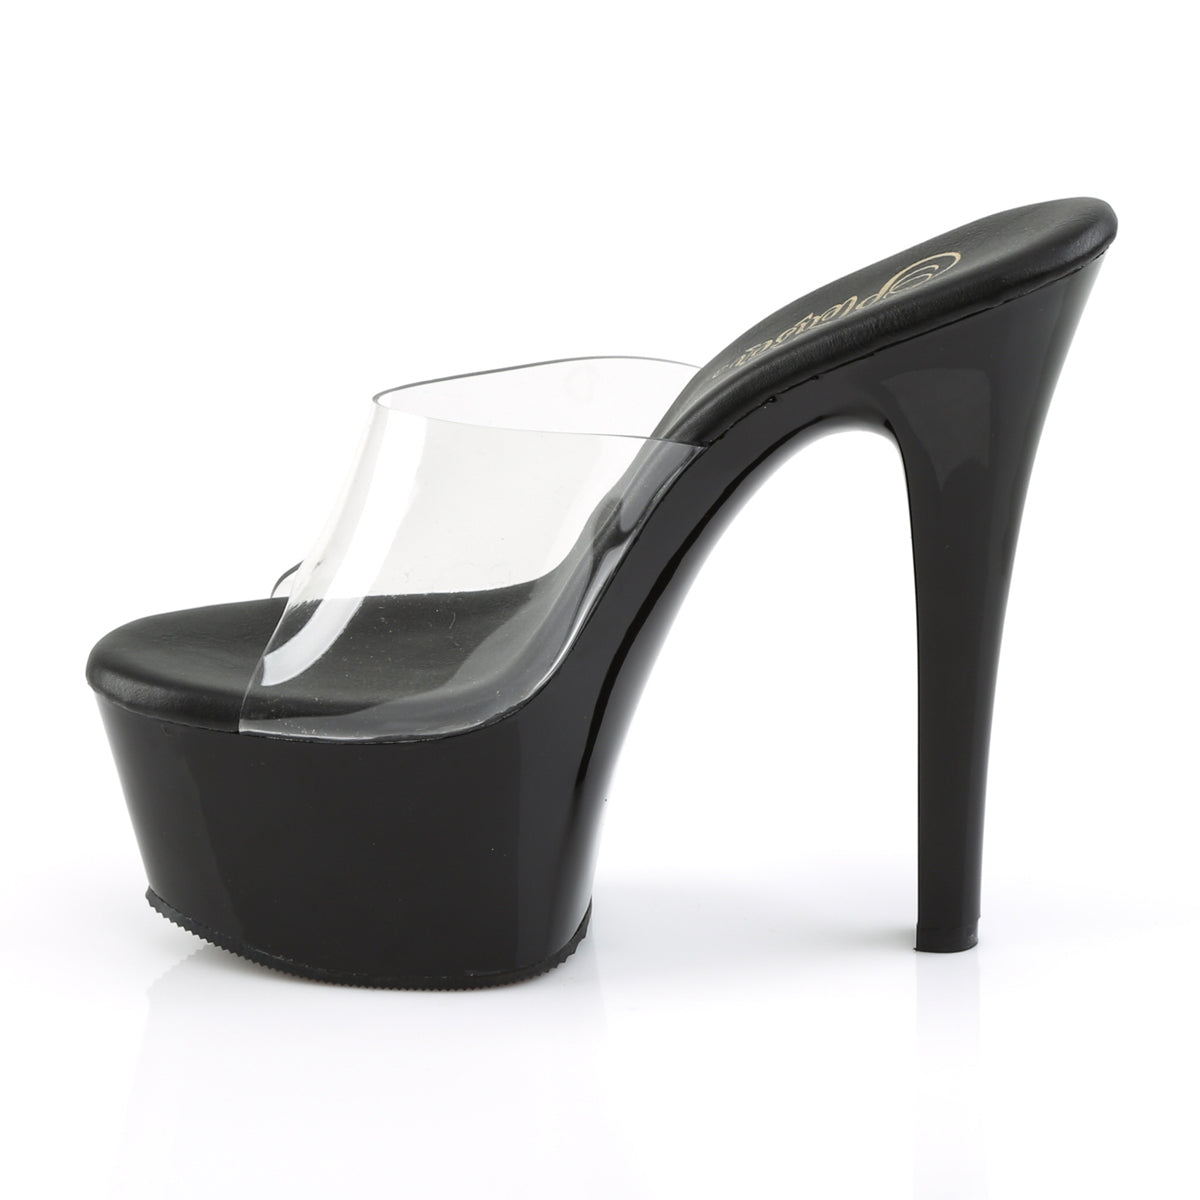 ASPIRE-601 Sexy 6" Heel Clear and Black Pole Dancing Shoes-Pleaser- Sexy Shoes Pole Dance Heels